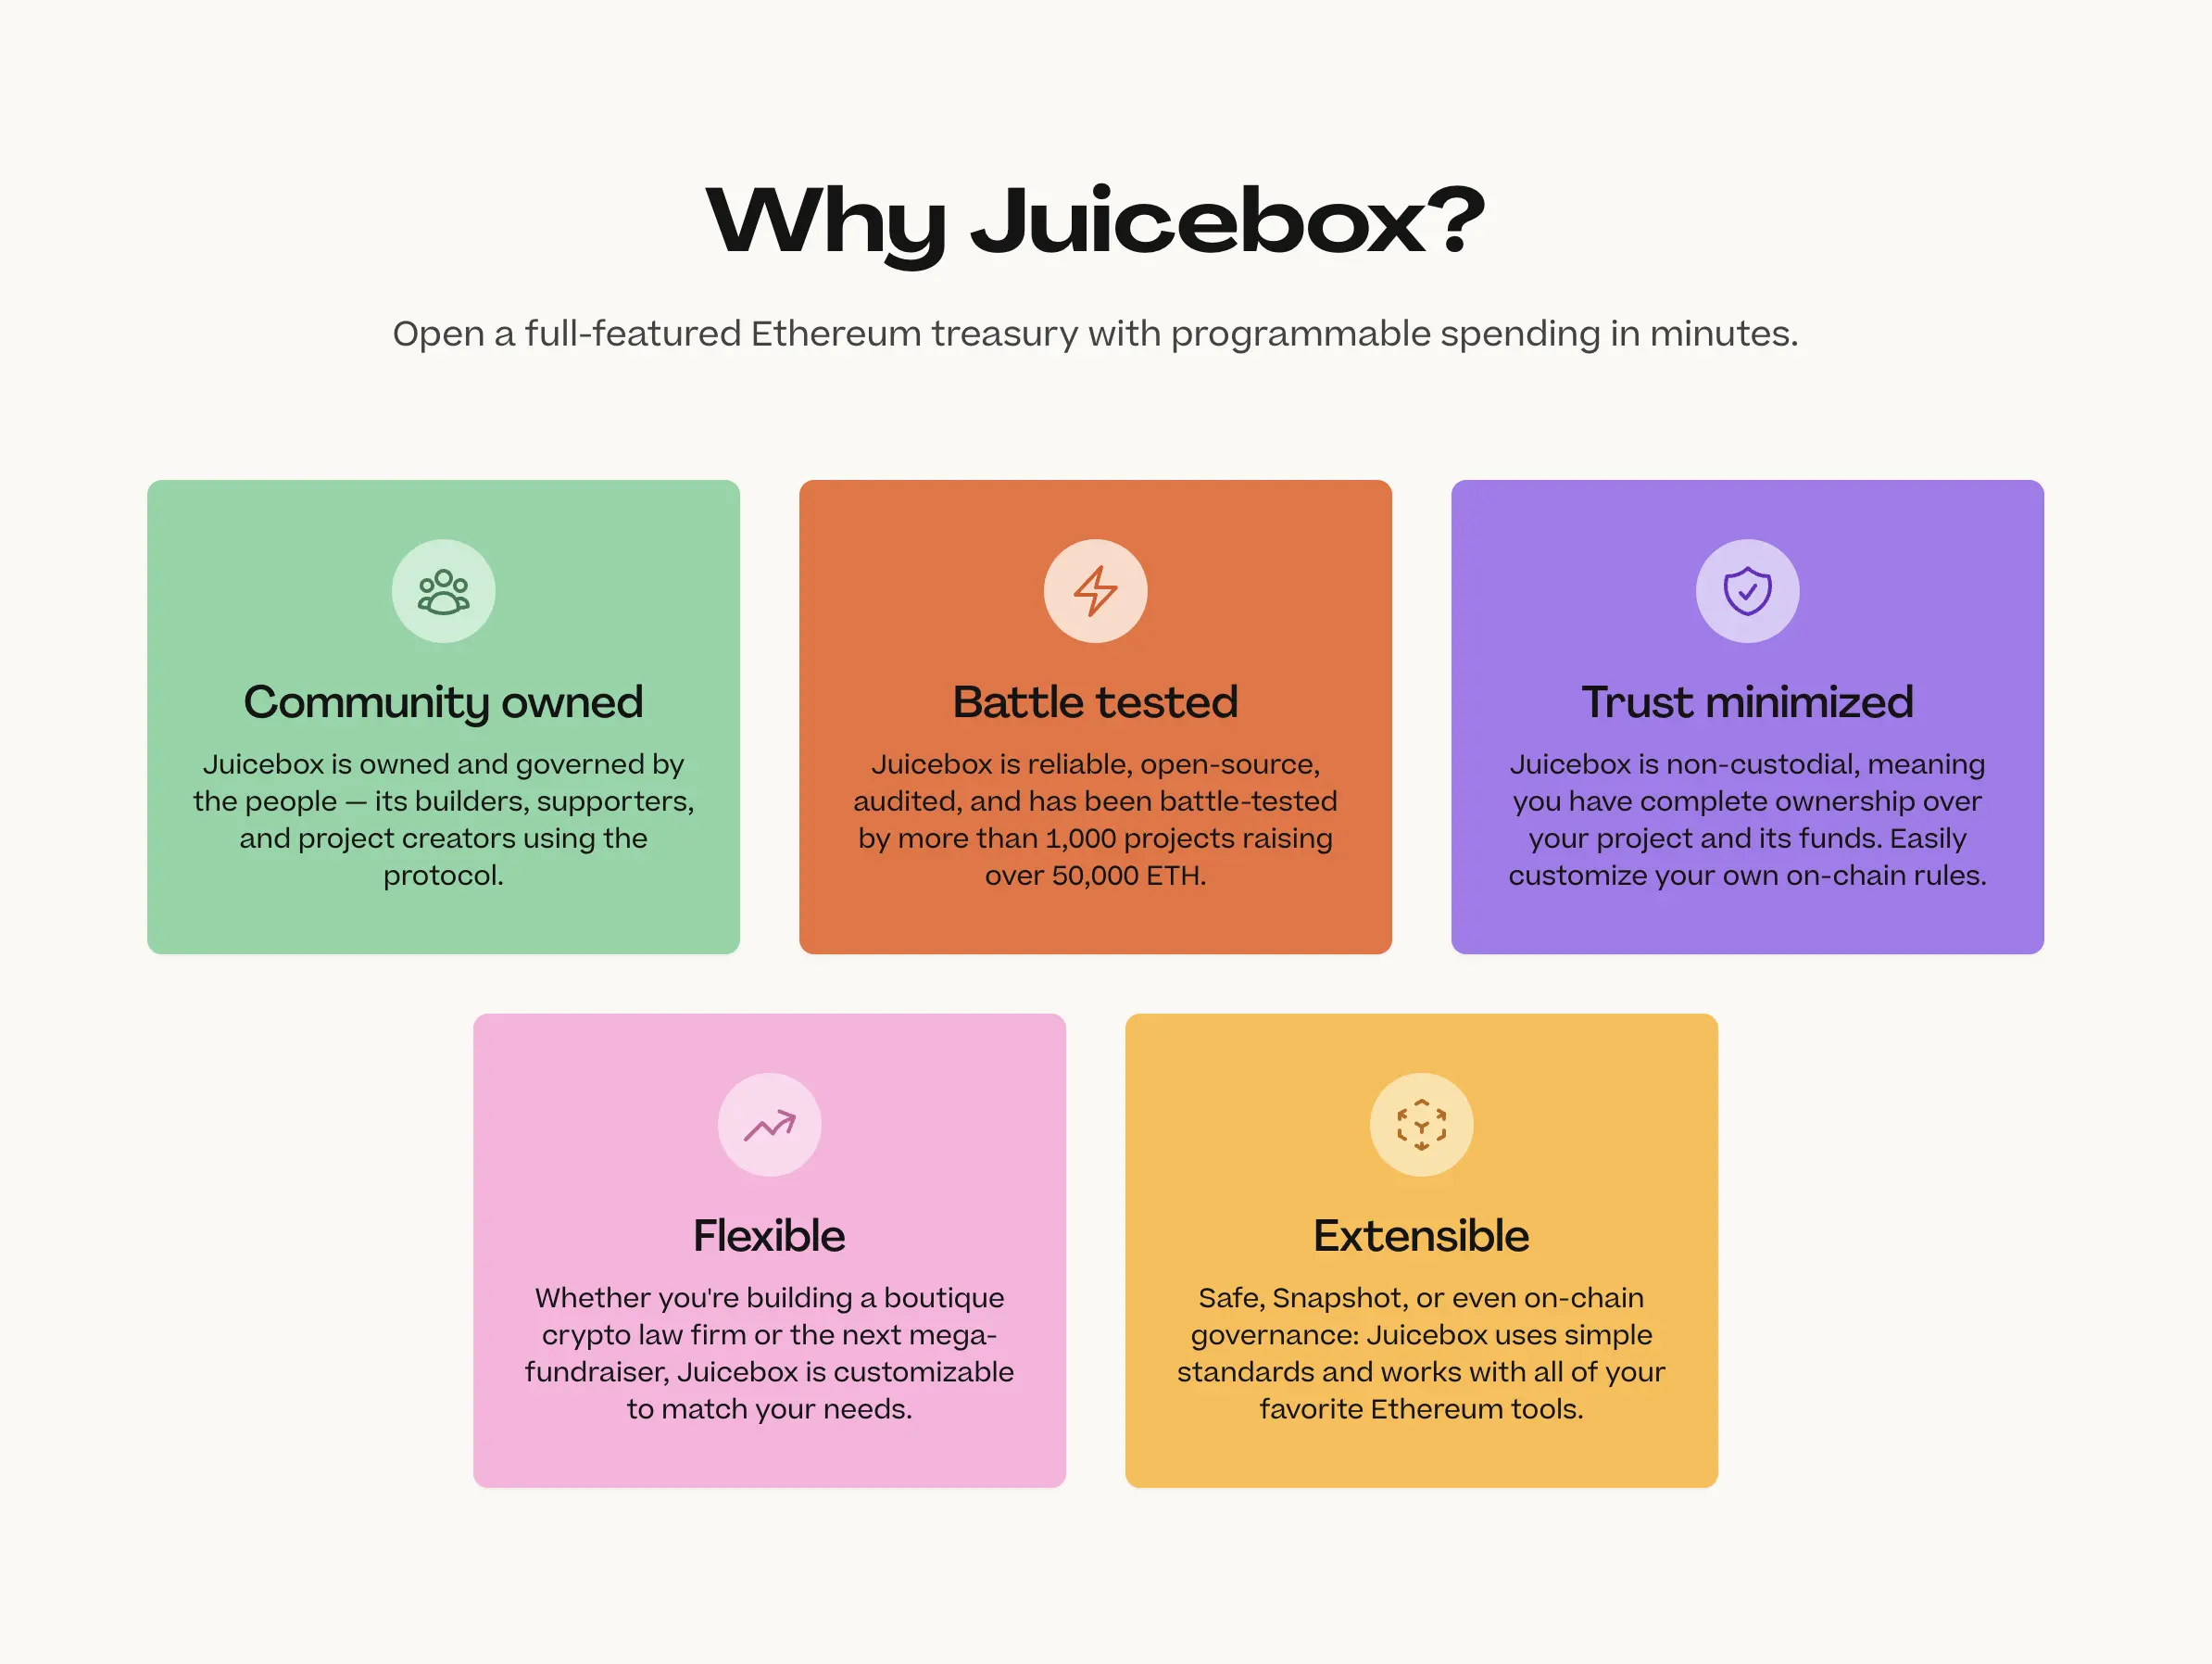 Section highlighting why you should use Juicebox